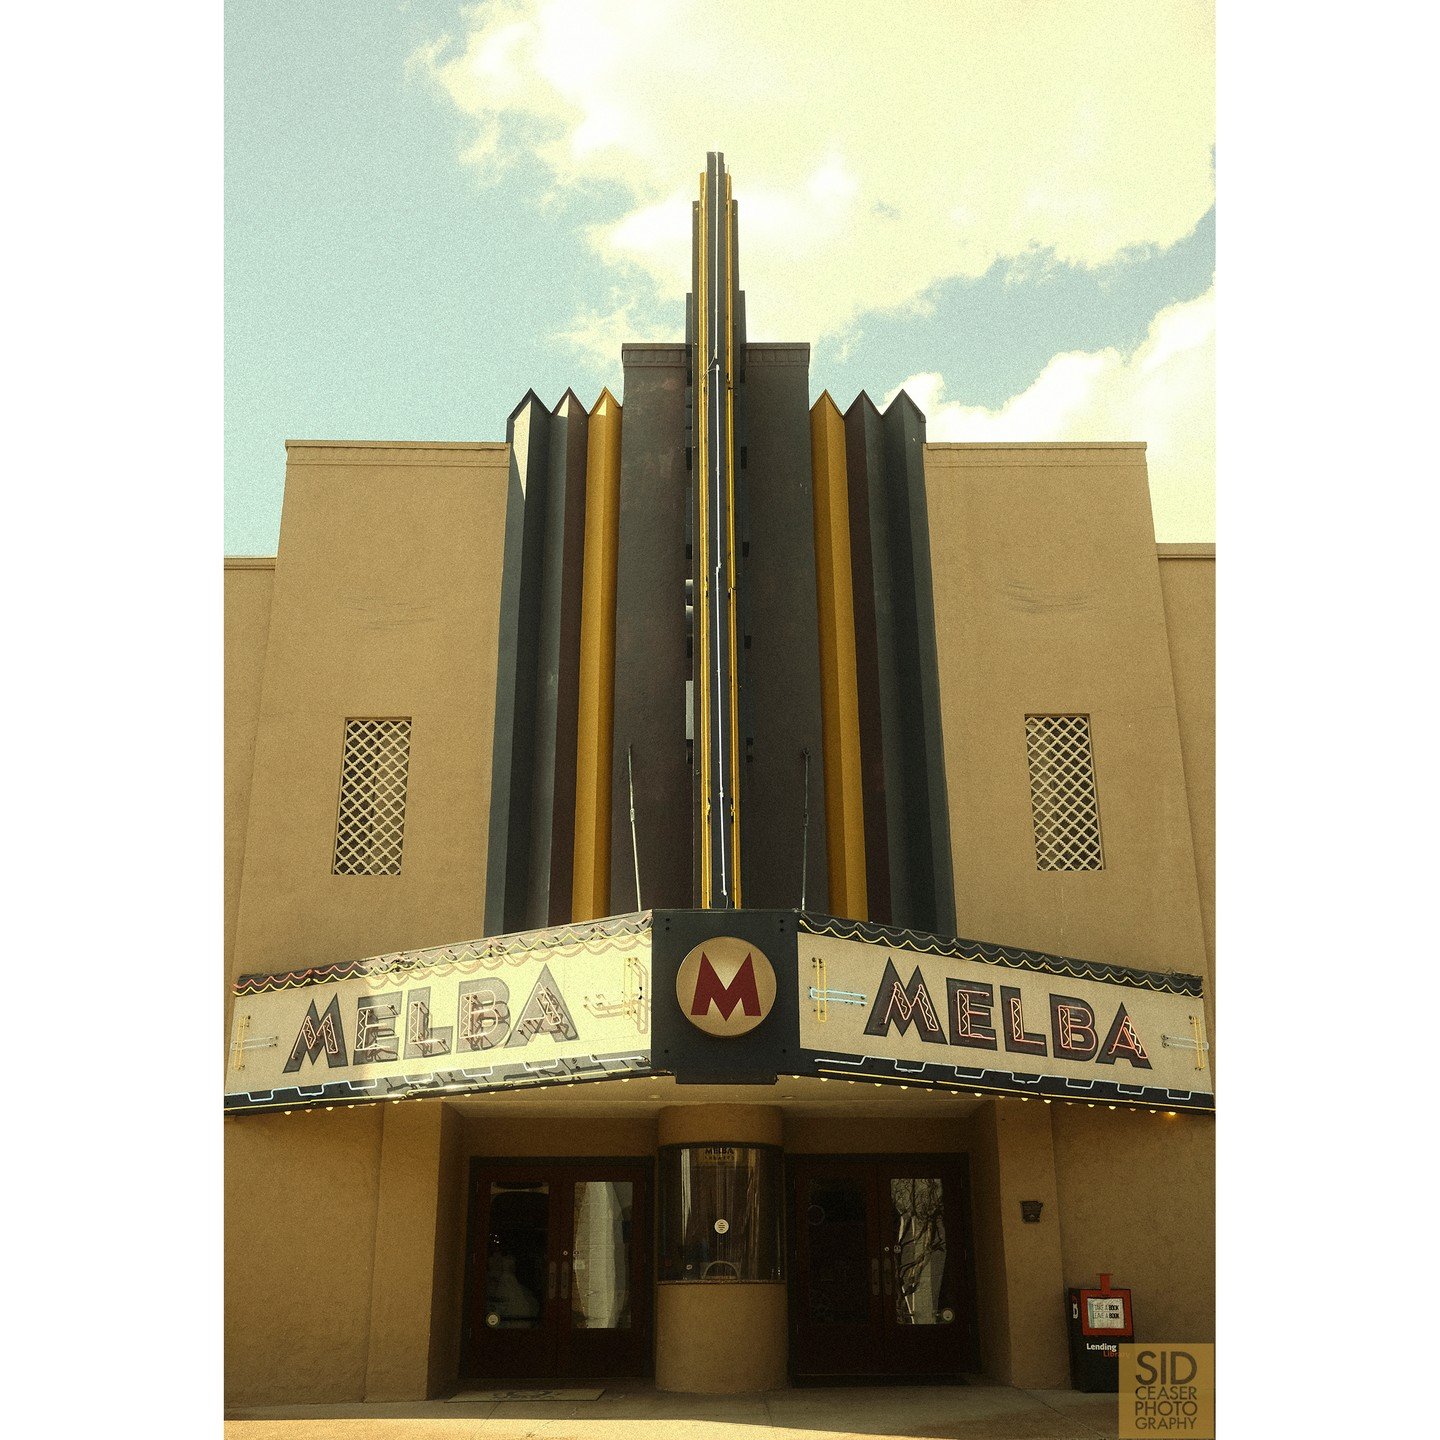 The Melba Theater in Batesville AK is in their old downtown. This theater is still active, and they show older films instead of new stuff. The week we were there they were showing &quot;E.T. - The Extra Terrestrial&quot;. It's a beautiful building wi